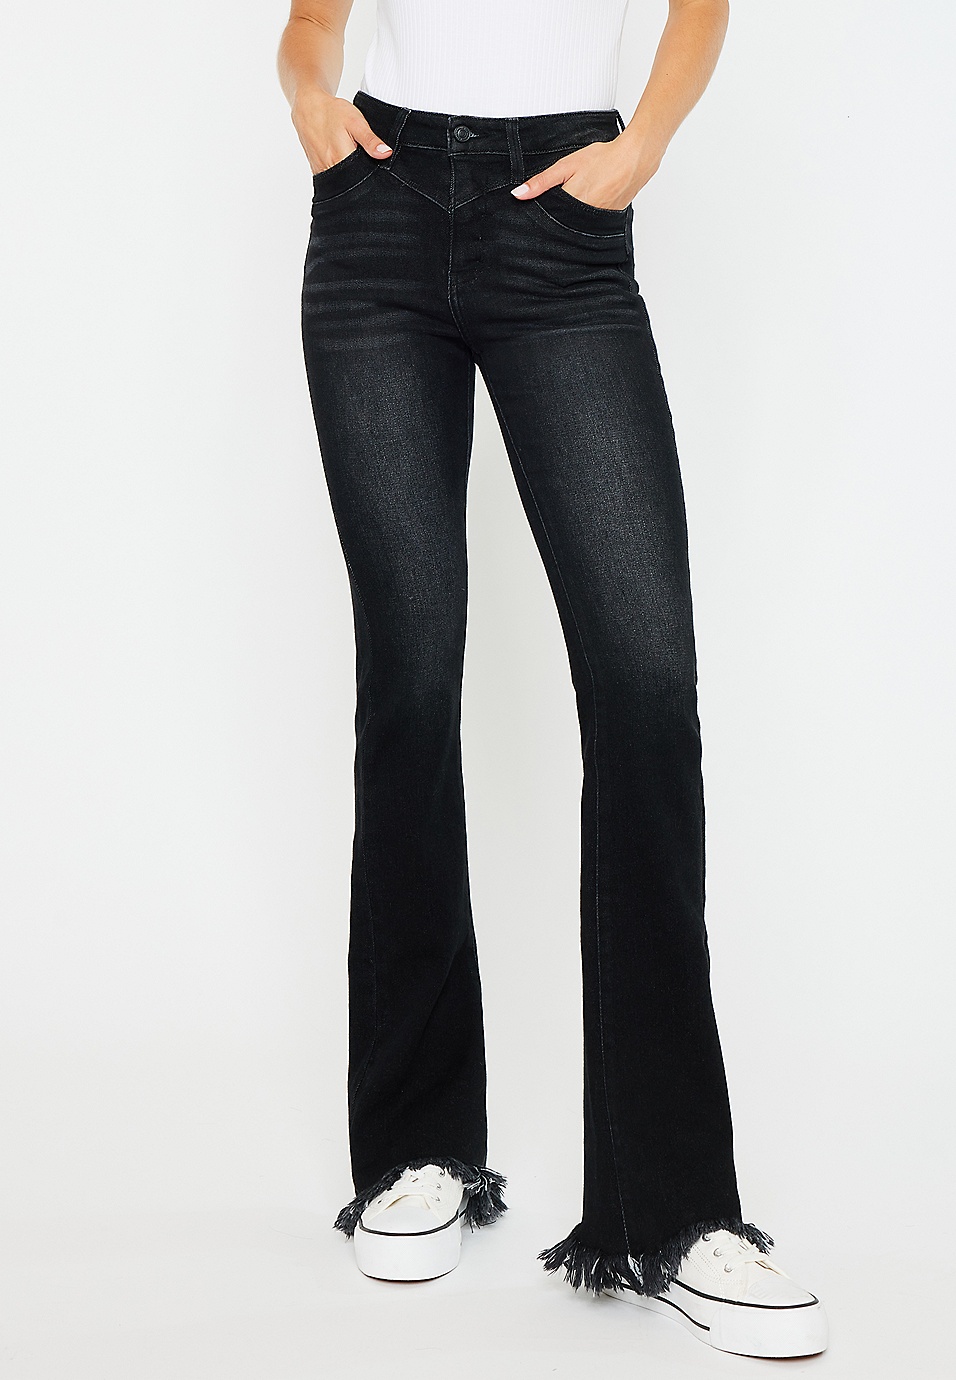 Washed Black Low Rise Jeggings